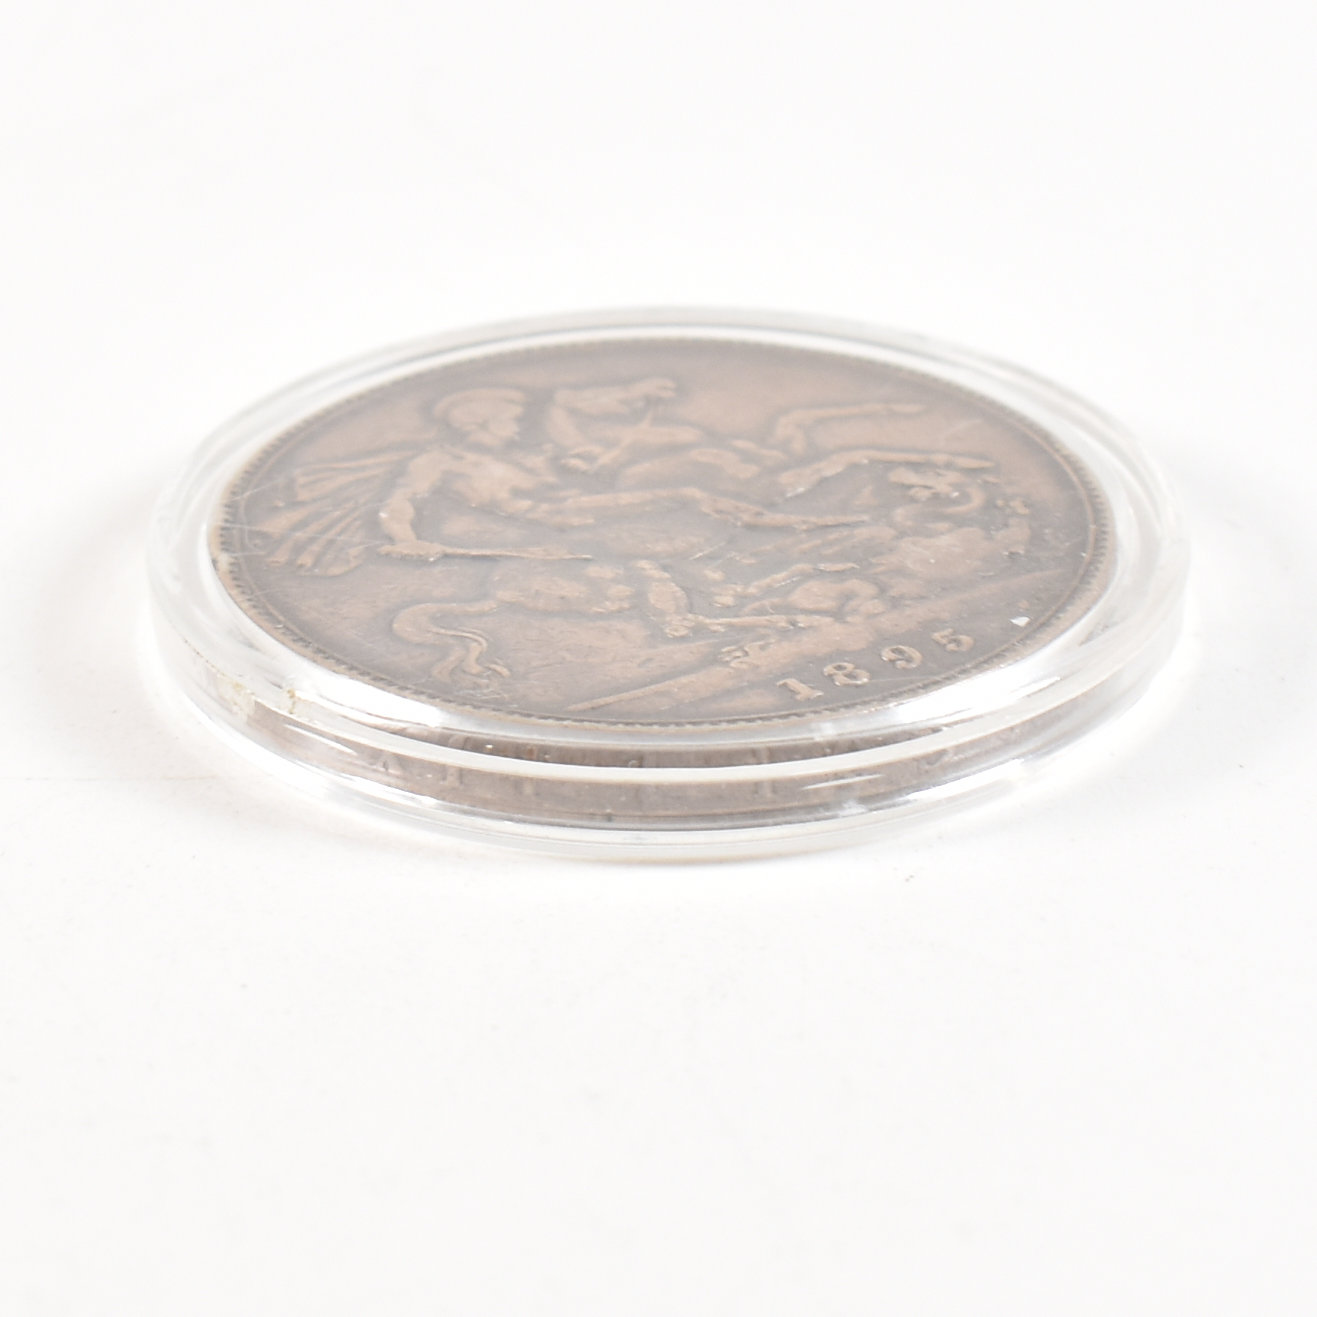 CASED 1895 SILVER CROWN COIN VICTORIA - Image 3 of 4